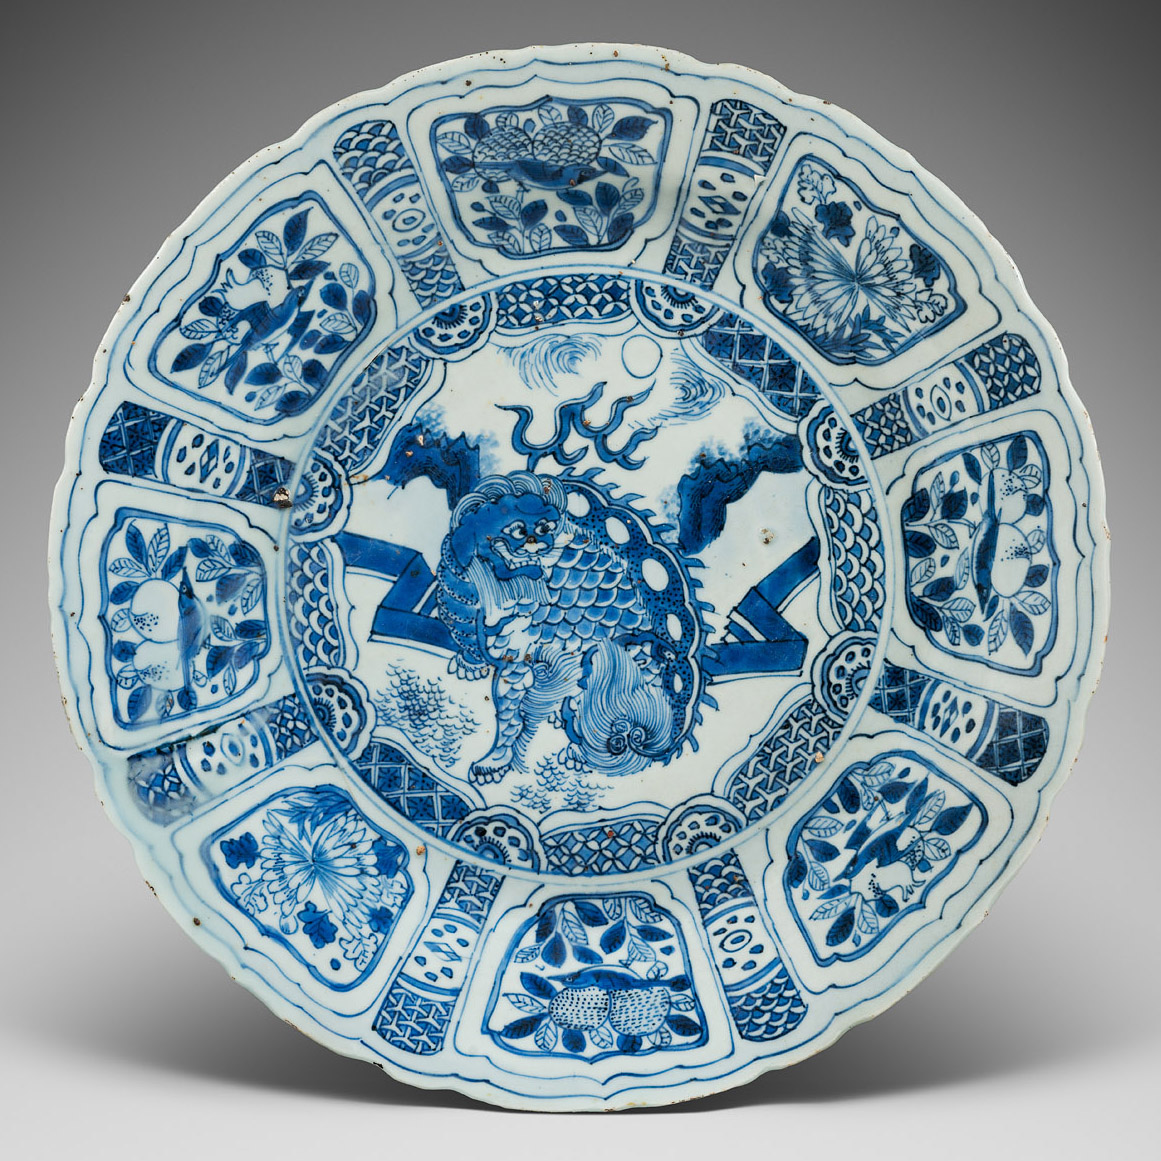 Porcelain Late Ming dynasty (1368-1644), ca 1610-1630, China